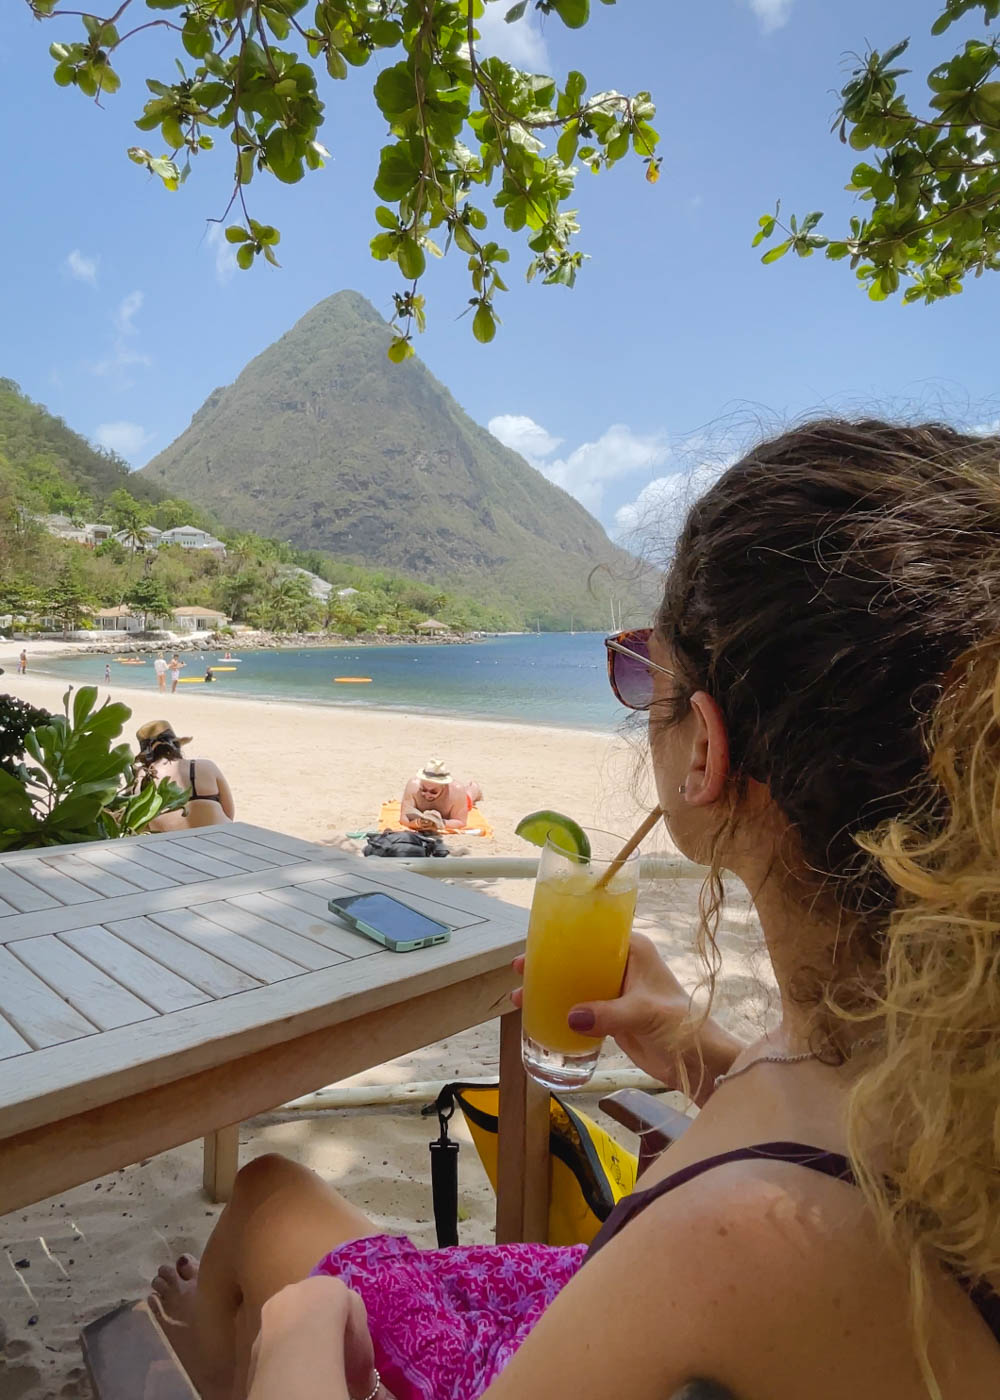 Me with a cocktail at Sugar Beach with Pitons in the distance.